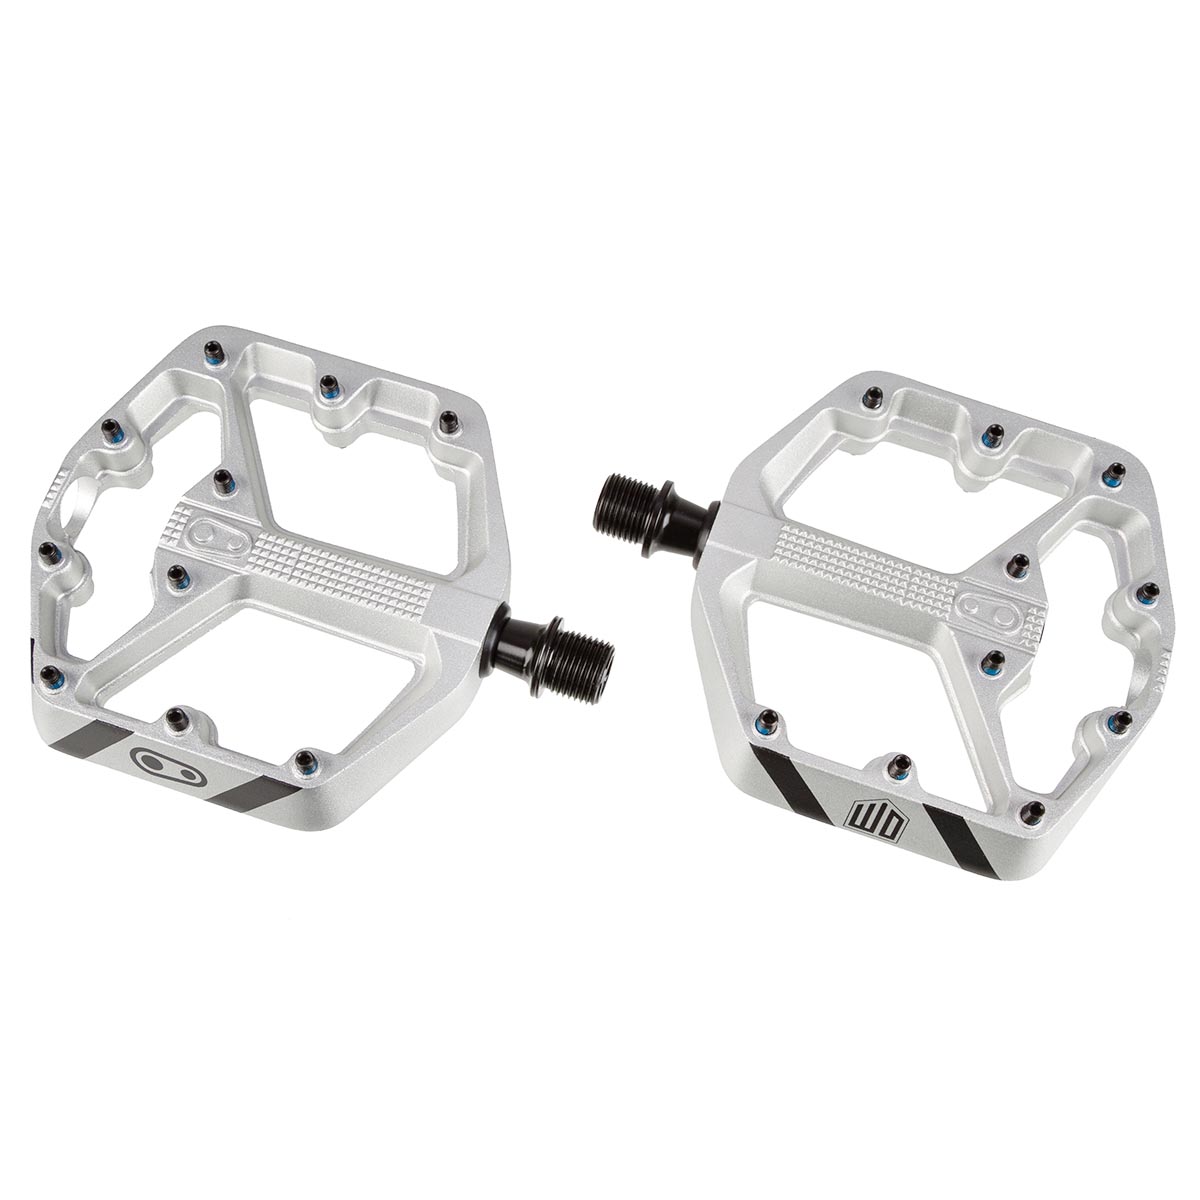 Crankbrothers Pedals Stamp 3 2019 Danny MacAskill Edition, Silver, Small